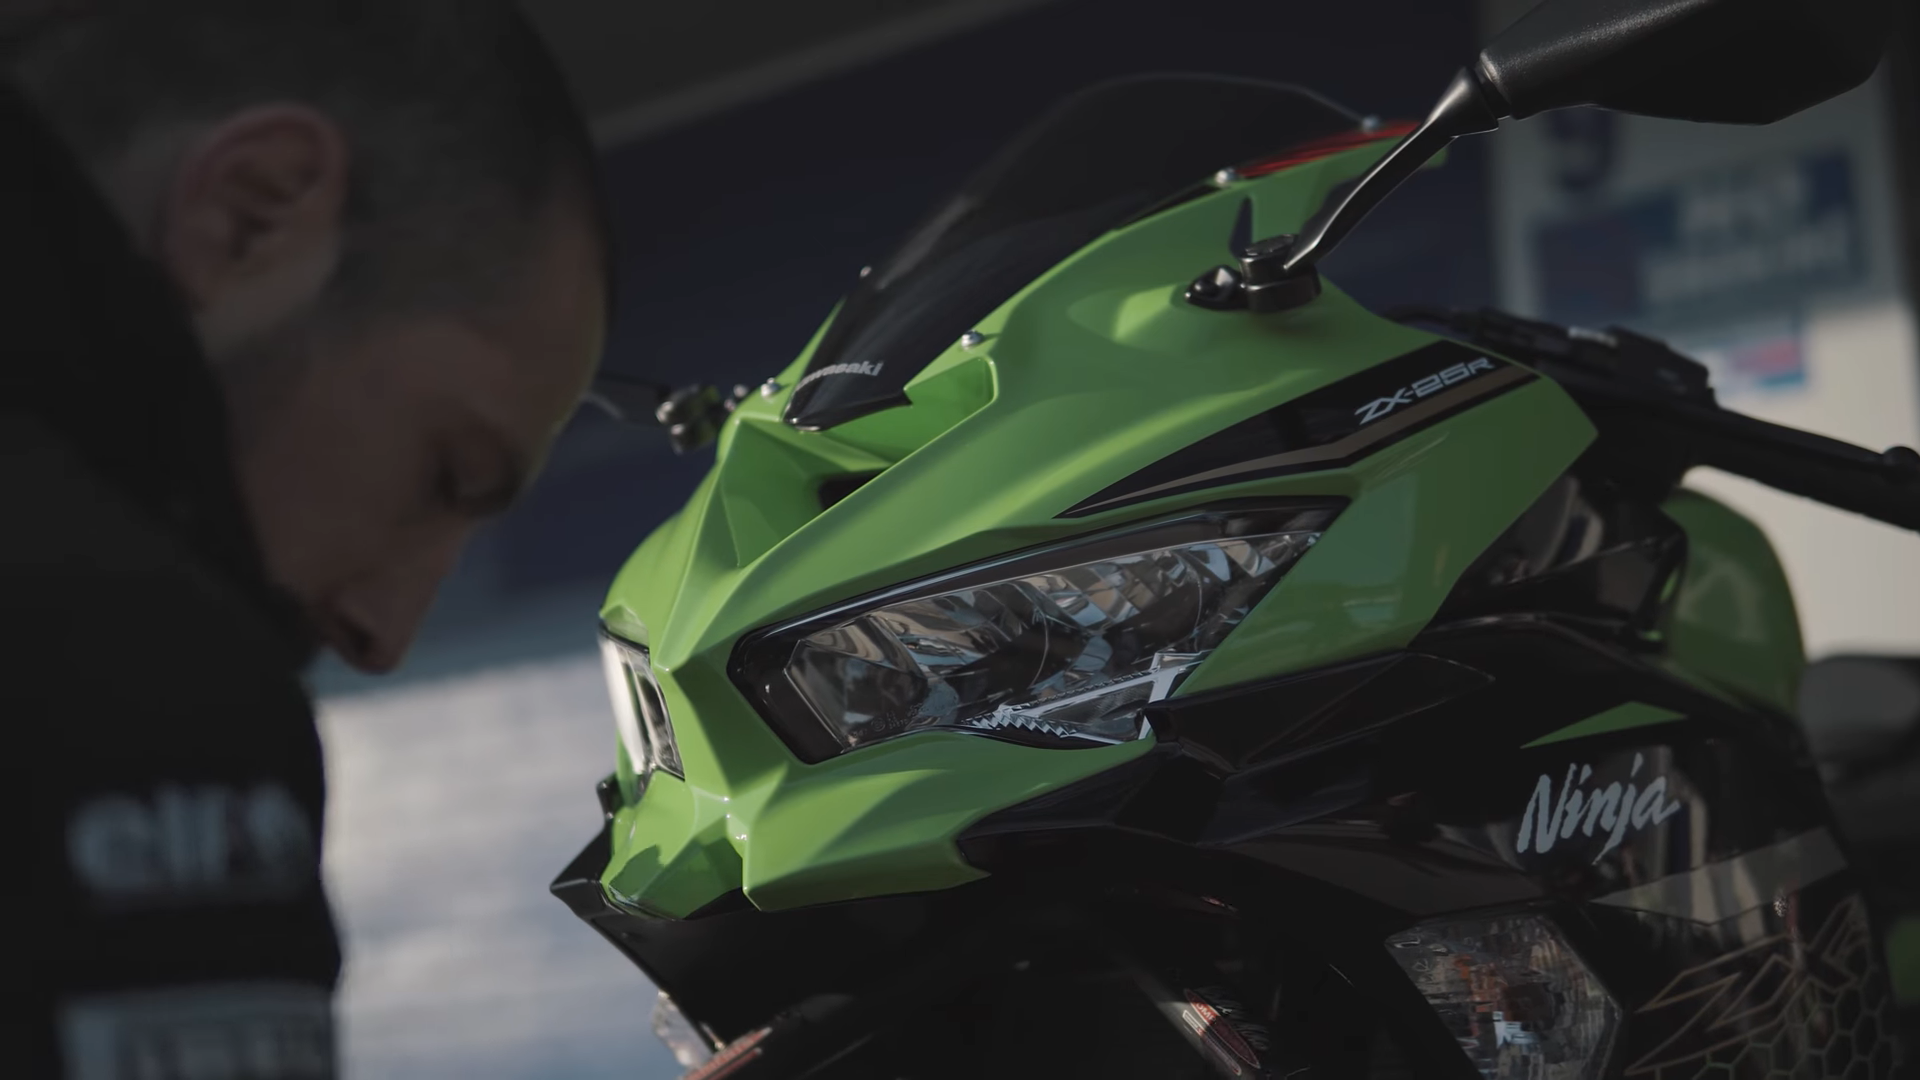 Kawasaki Announce Accessories For The ZX 25R